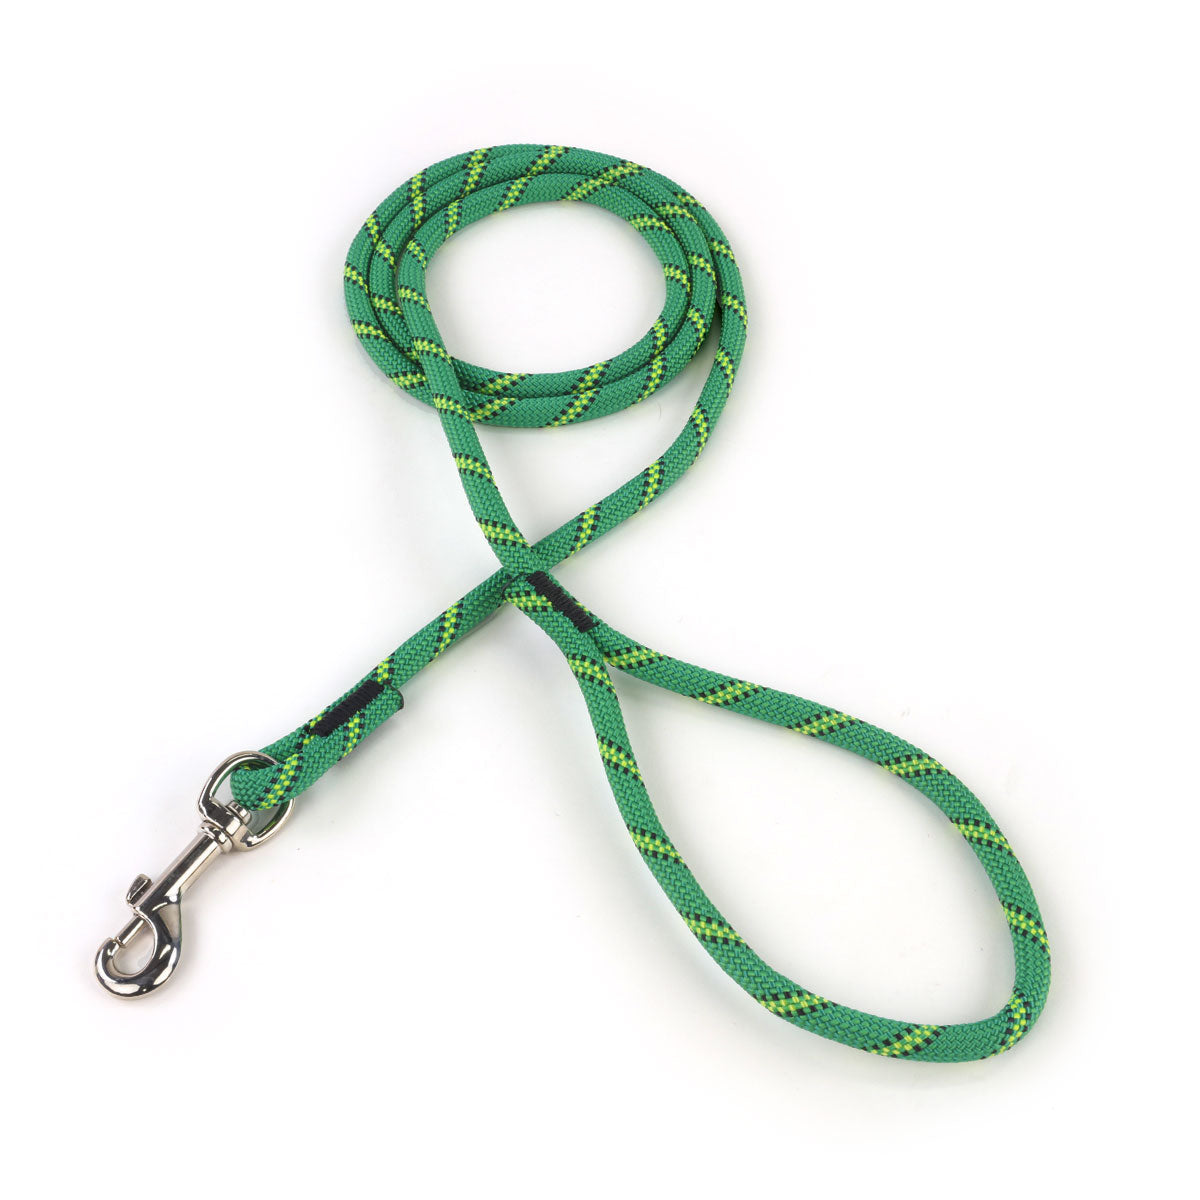 3/8 Green w/ Neon Yellow & Black Tracer Rope Leash – Atwood Rope MFG